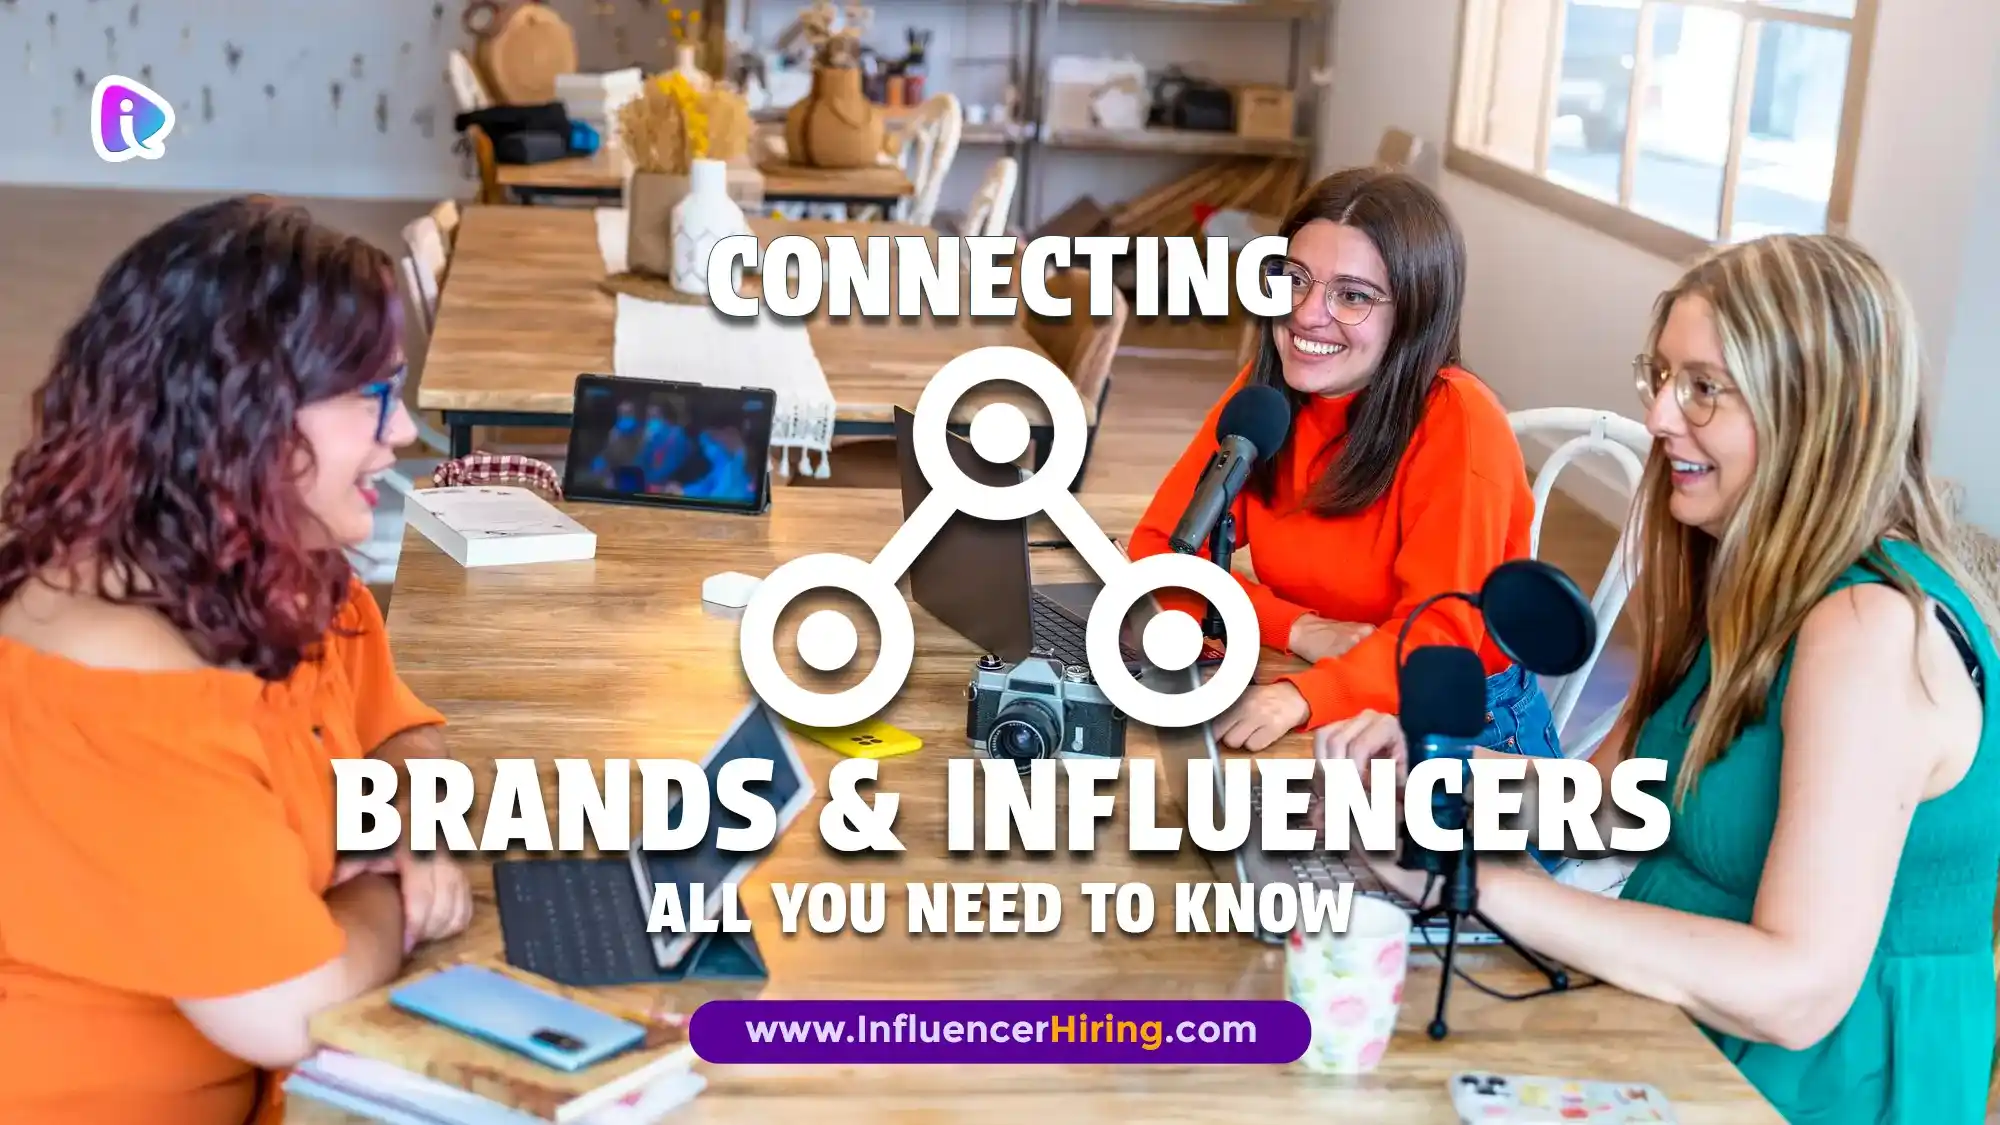 003_Connecting_Brands_and_Influencers.webp